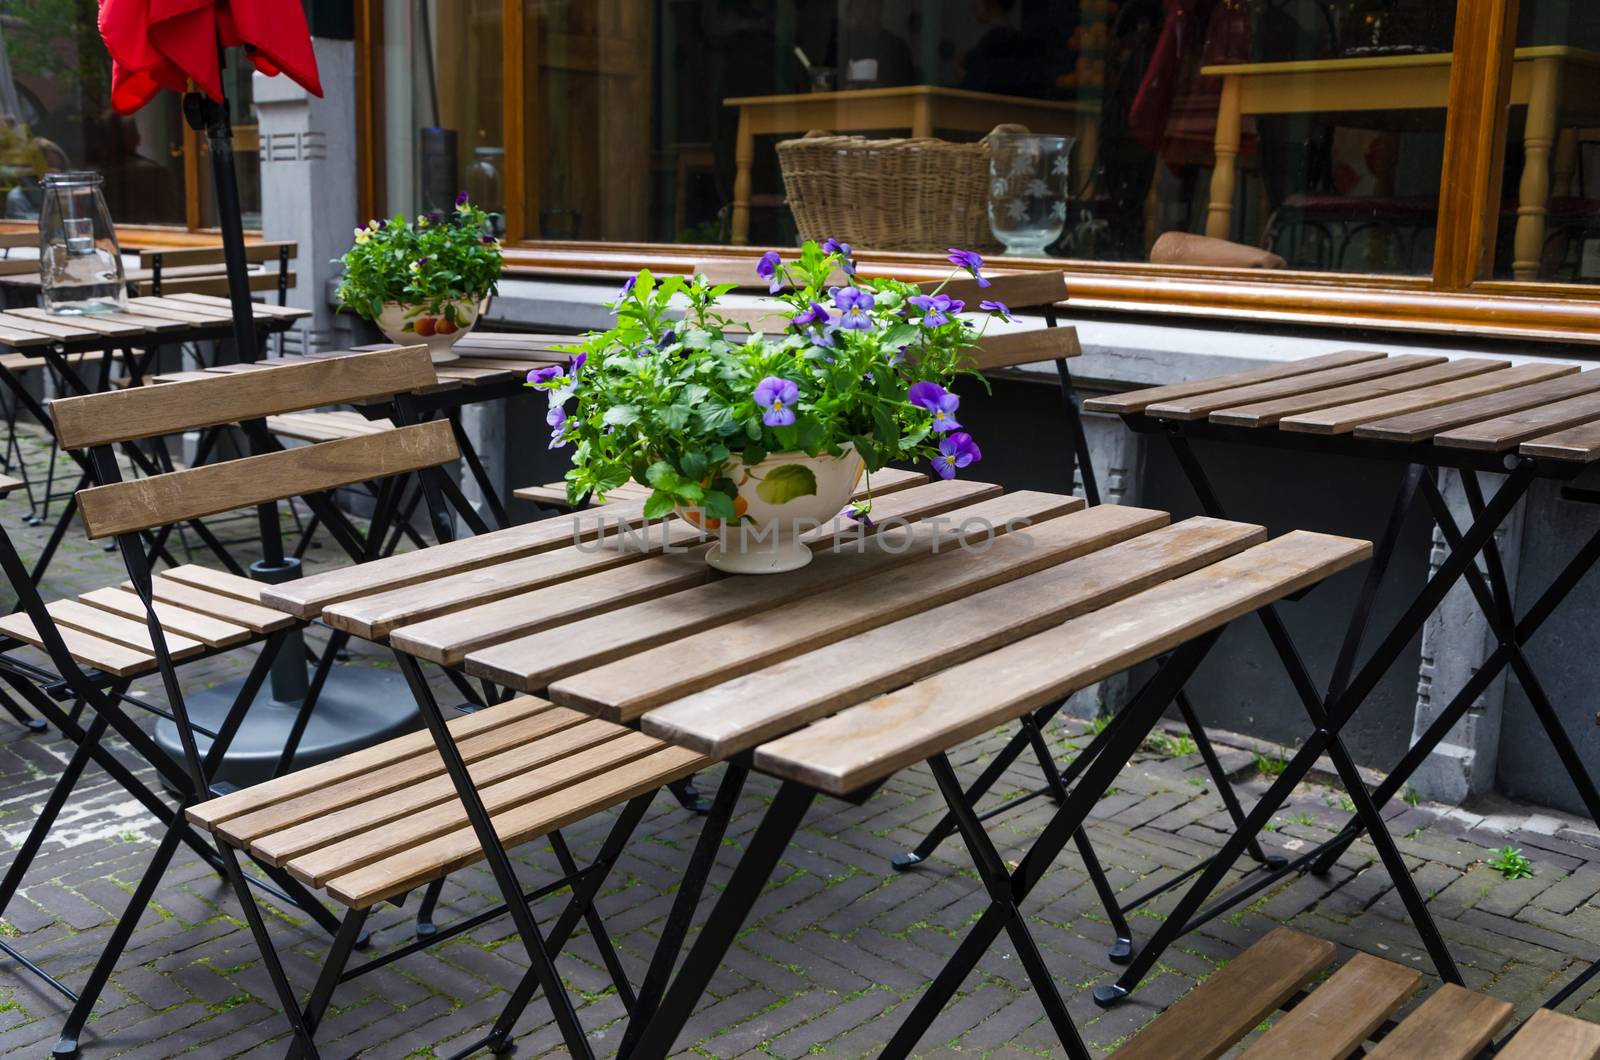 Cafe tables and chairs in The Hague, Netherlands